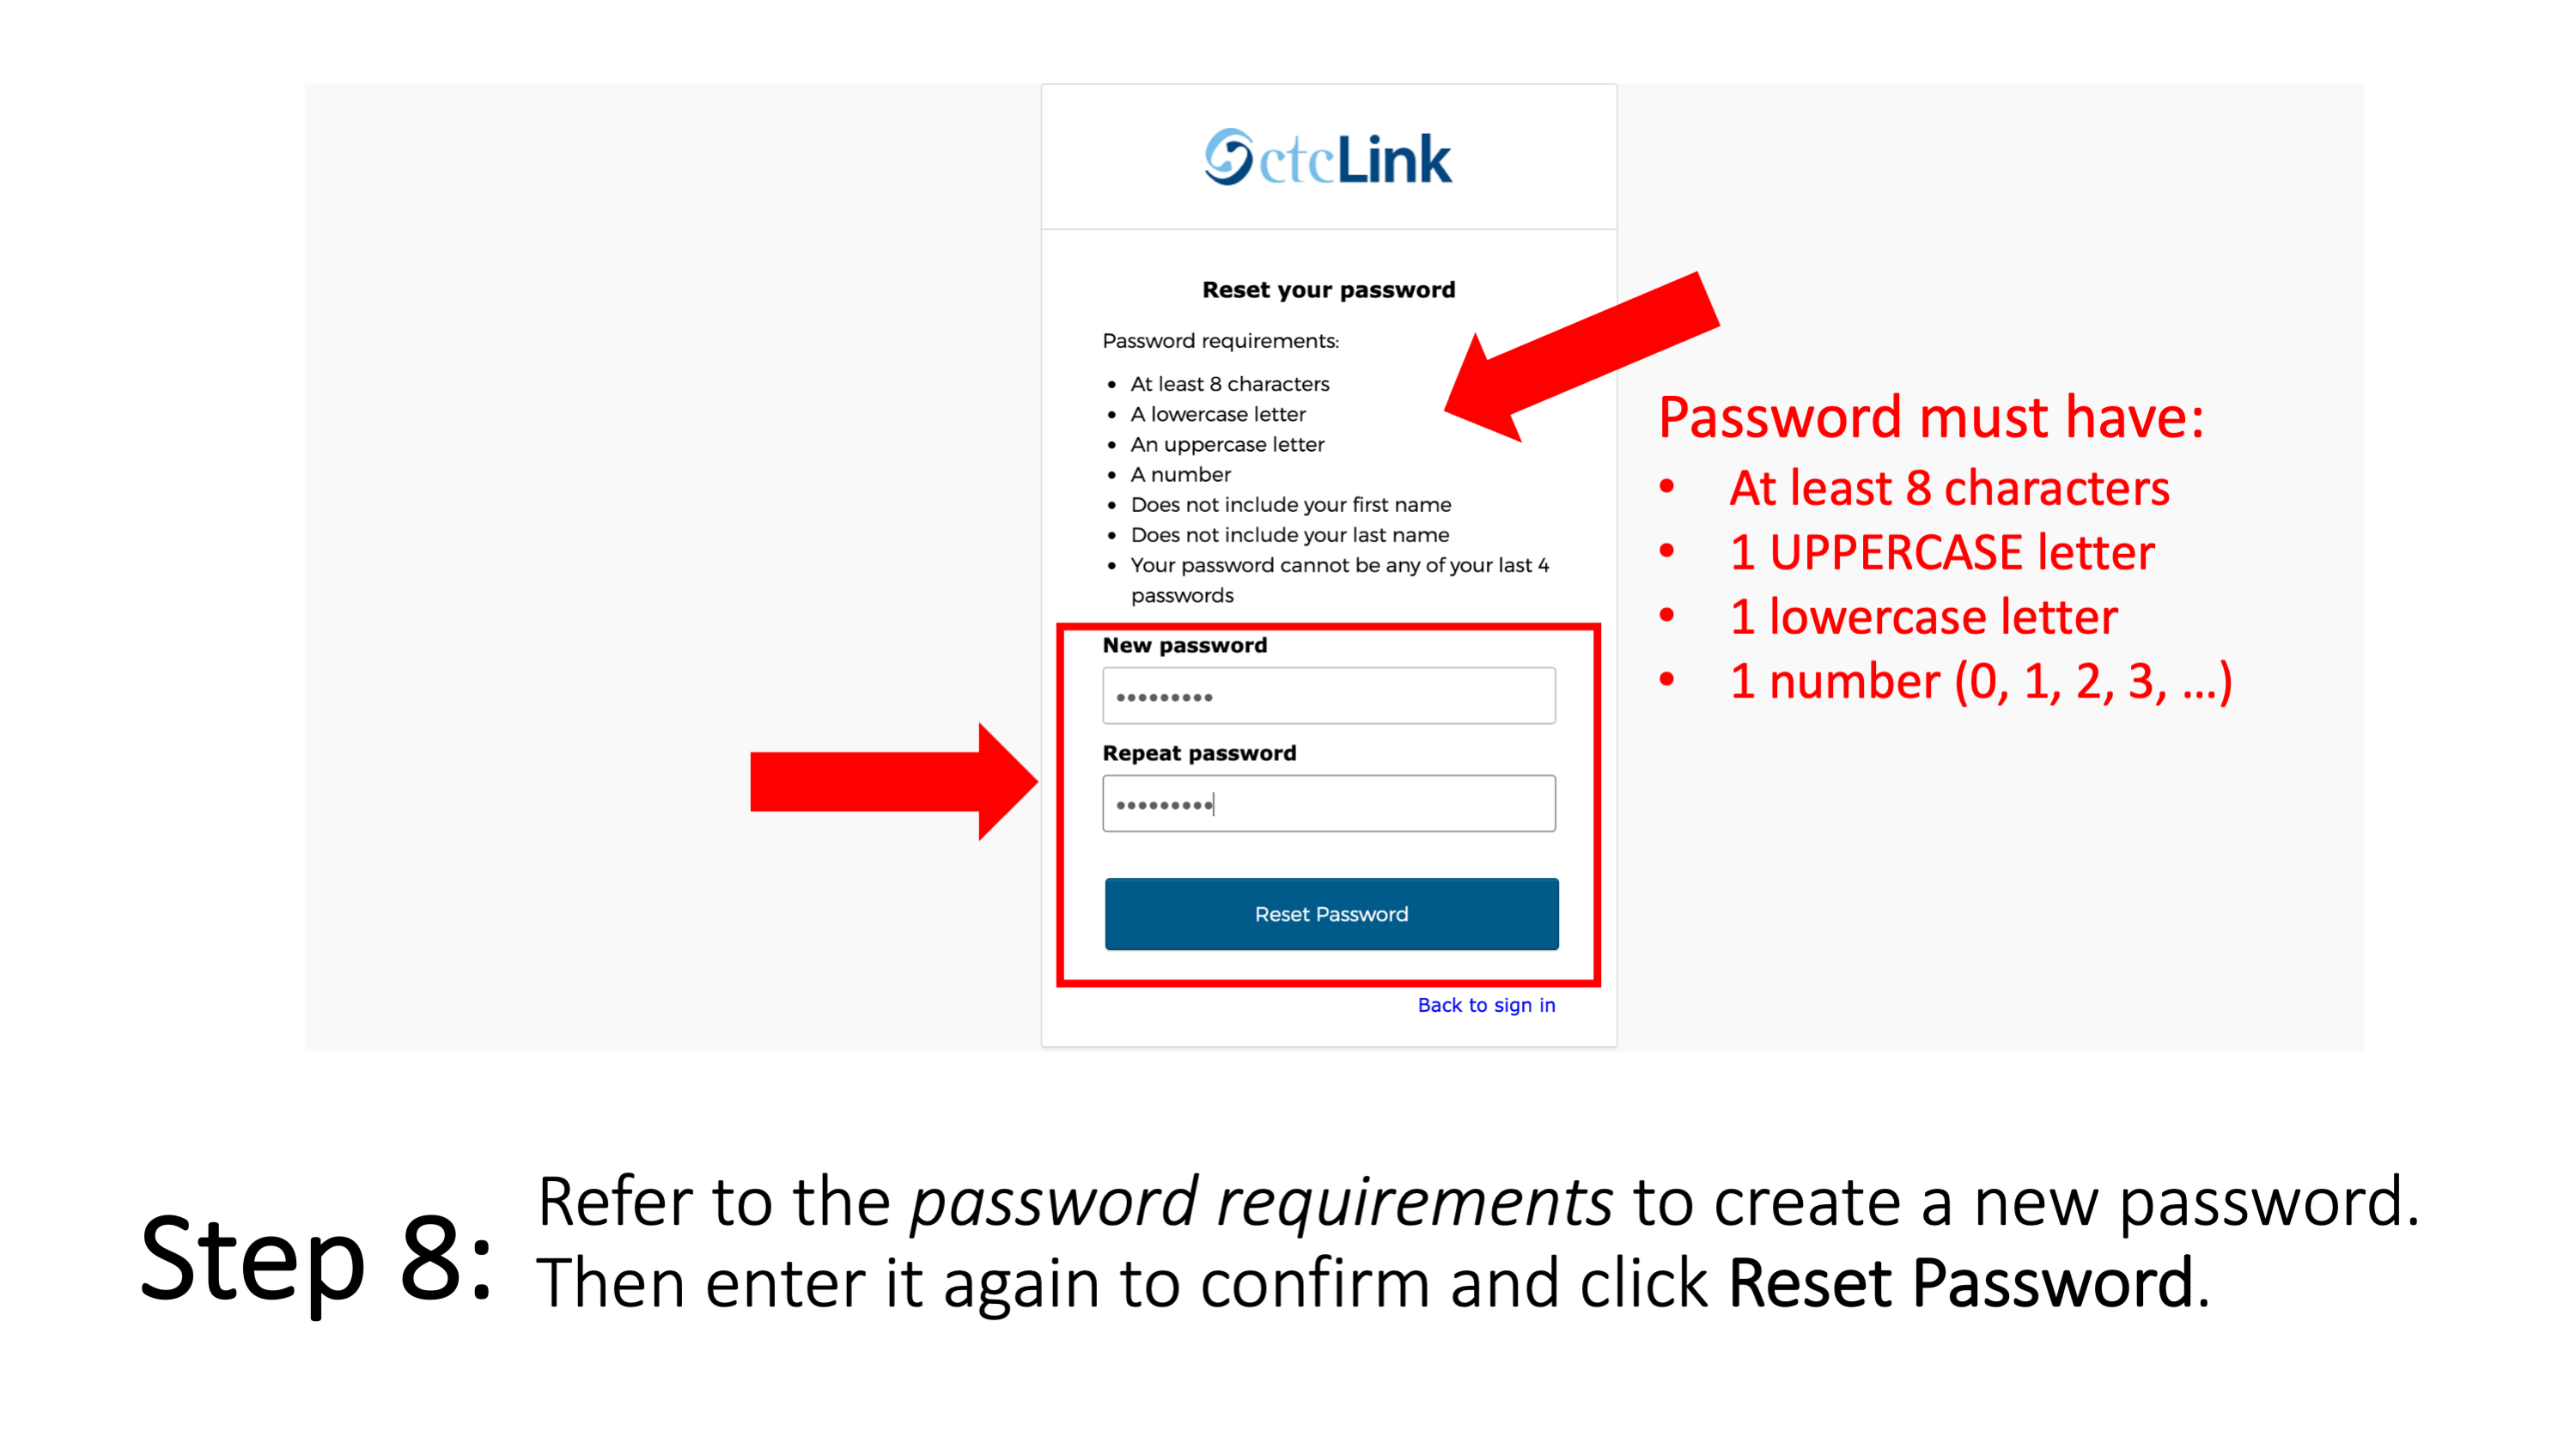 Step 8: Refer to the password requirements to create a new password. Then enter it again to confirm and click Reset Password. Password must have: at least 8 characters, 1 uppercase letter, 1 lowercase letter, and 1 number.